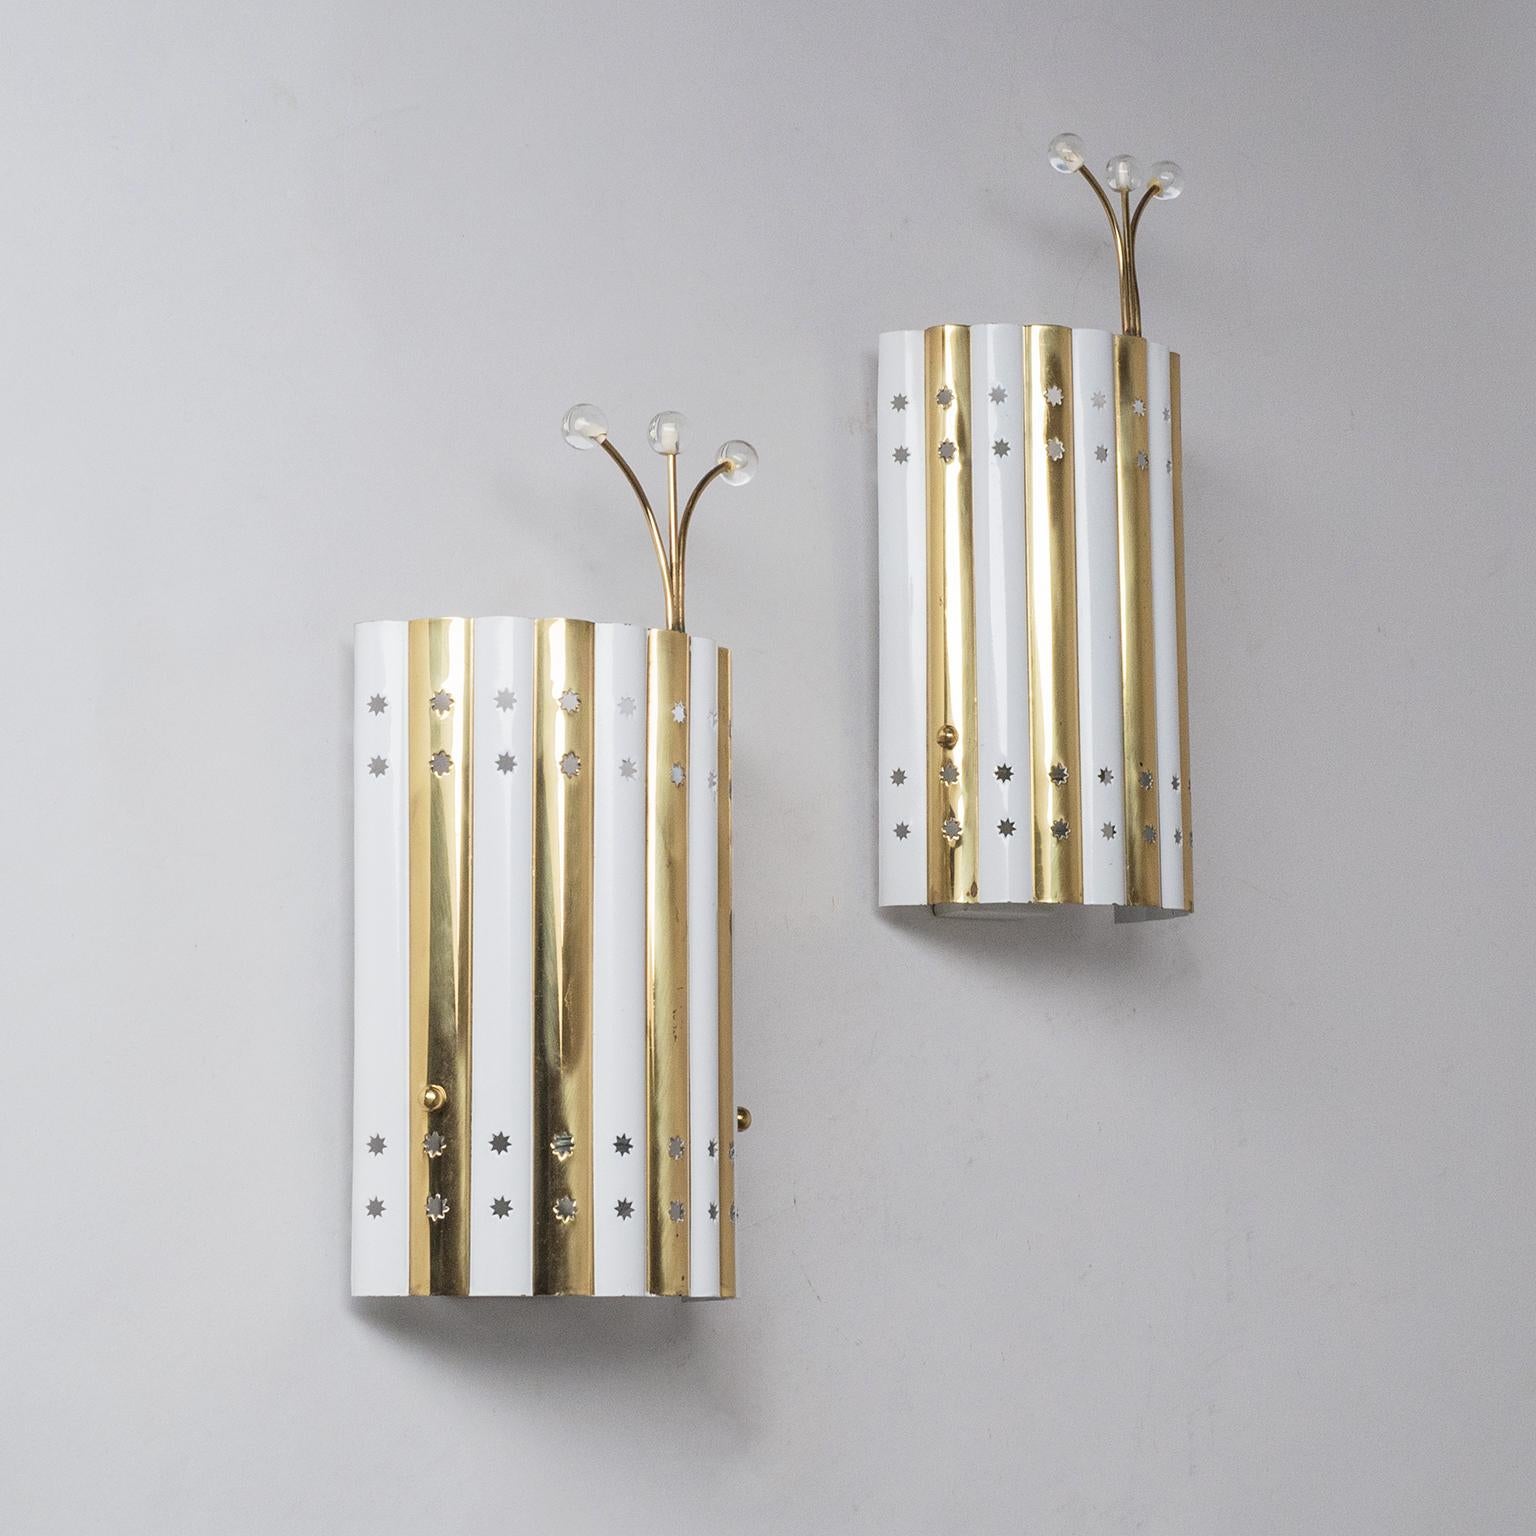 Very rare pair of brass sconces attributed to Emil Stejnar, 1950s. Made of sculpted sheet brass with alternating white lacquered stripes these unique wall lights have four rows of star shaped cutouts and are topped off with charming glass adorned